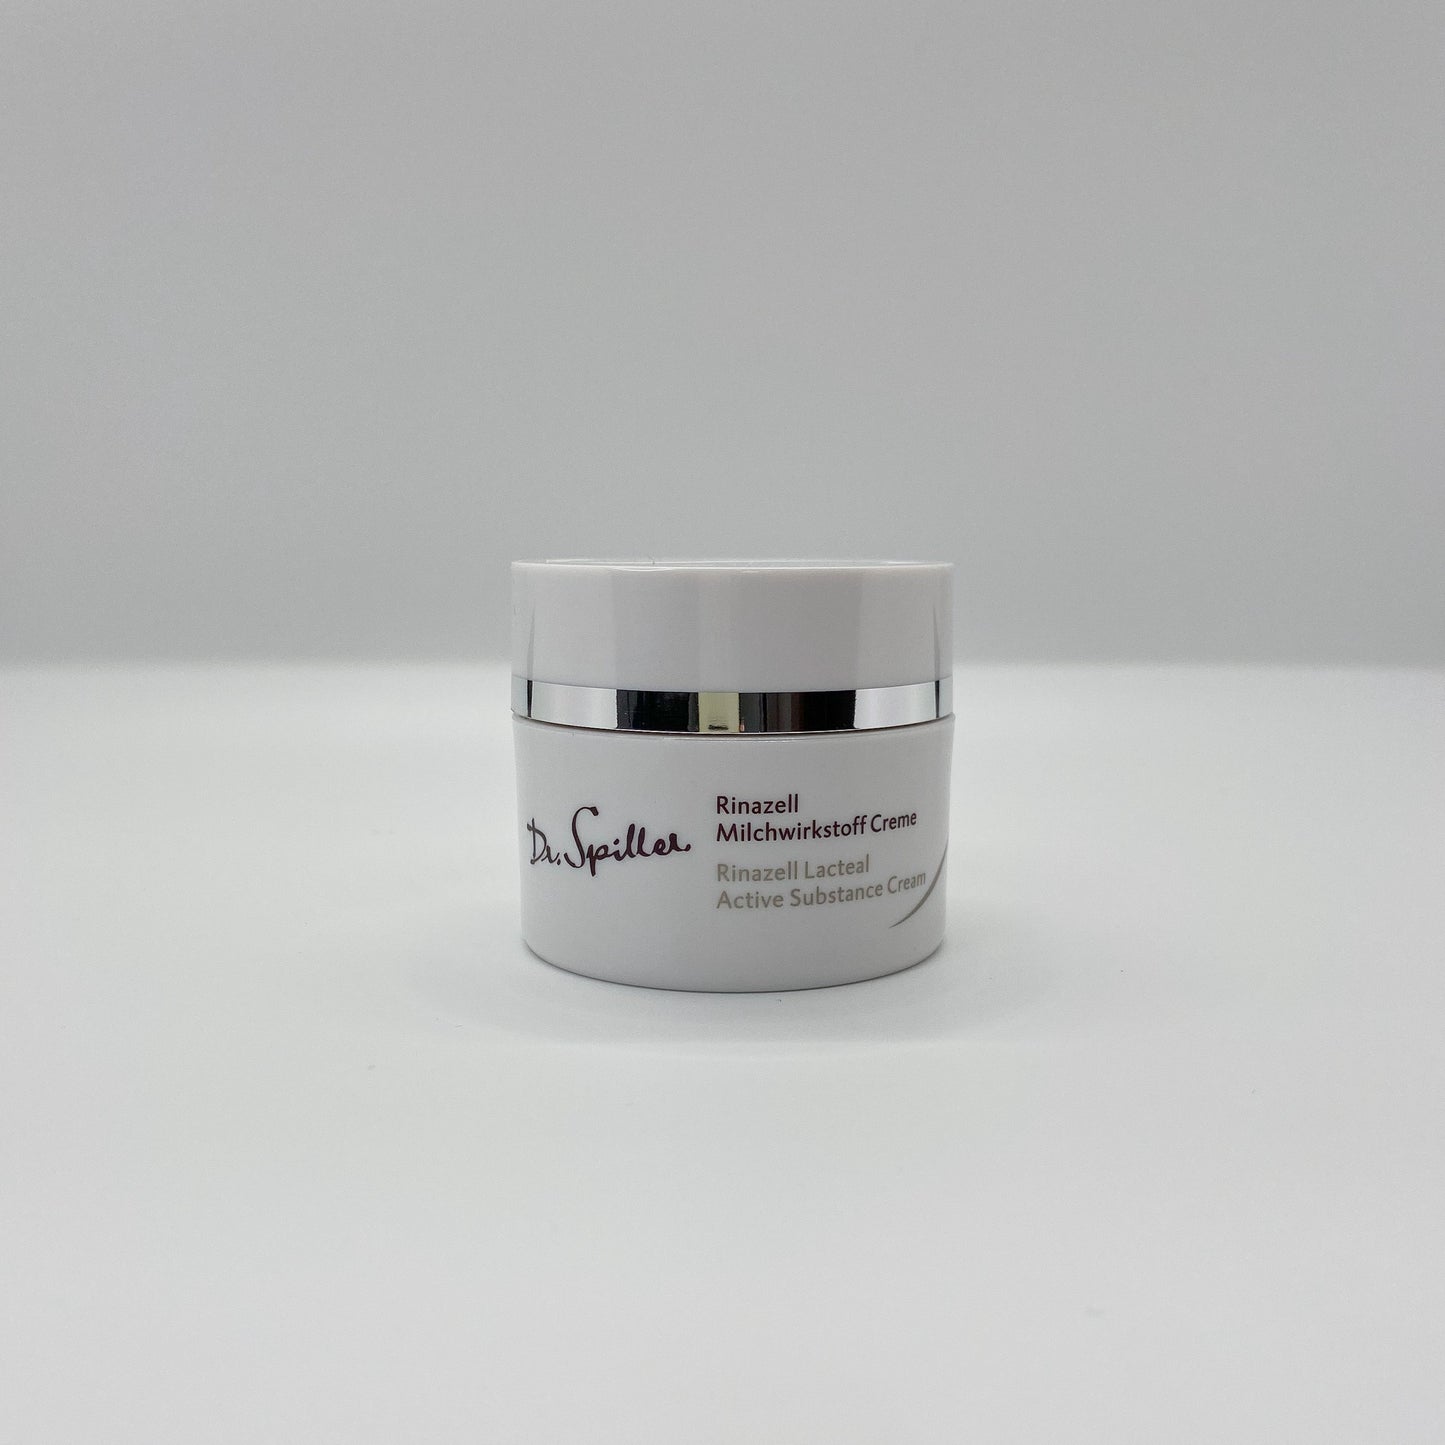 Rinazell Lacteal Active Substance Cream